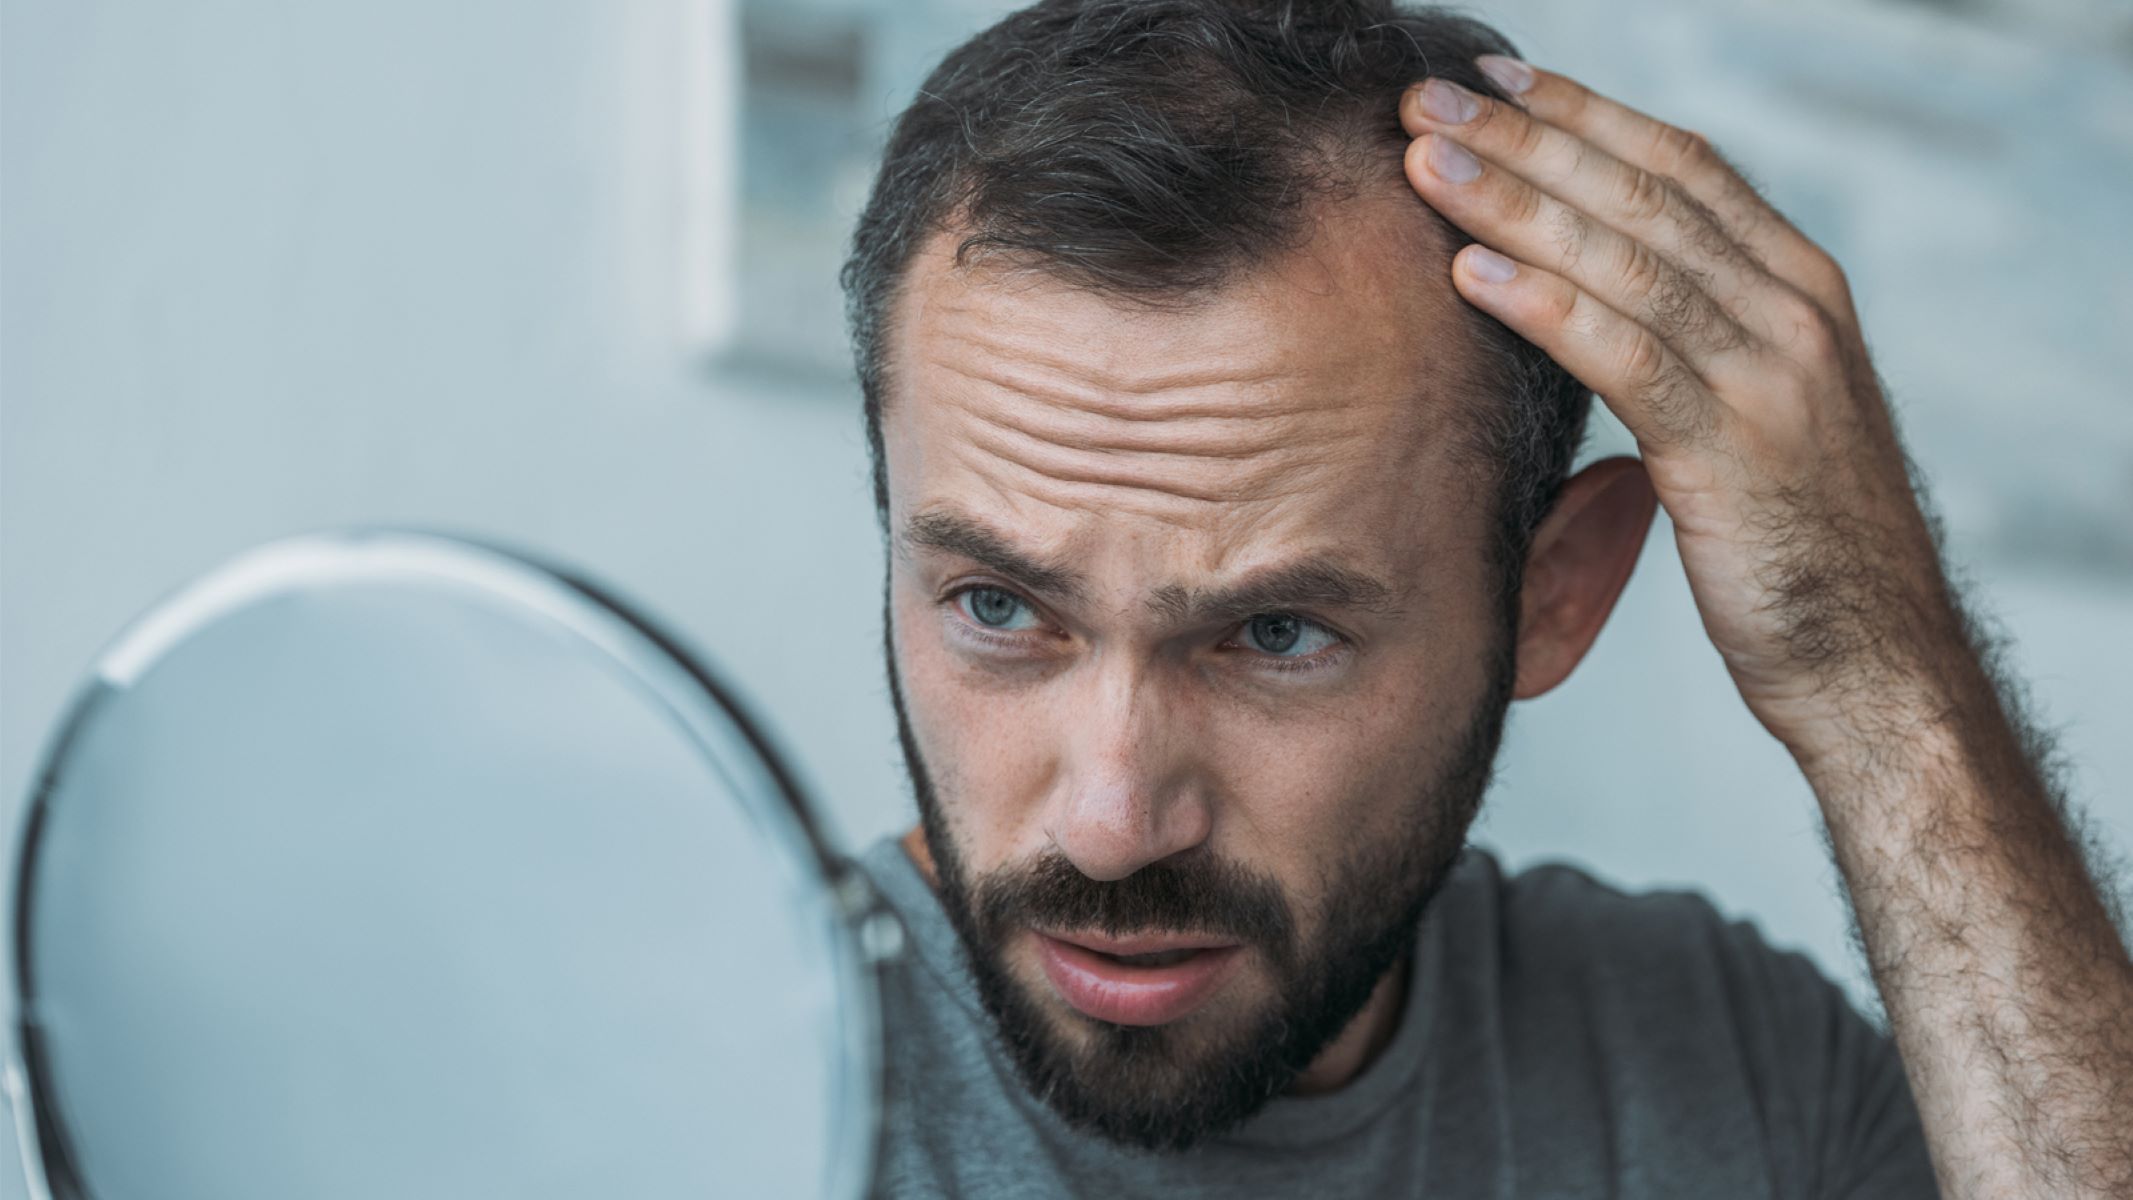 The Ultimate Solution For Men's Hair Loss: The Best Shampoo Revealed!